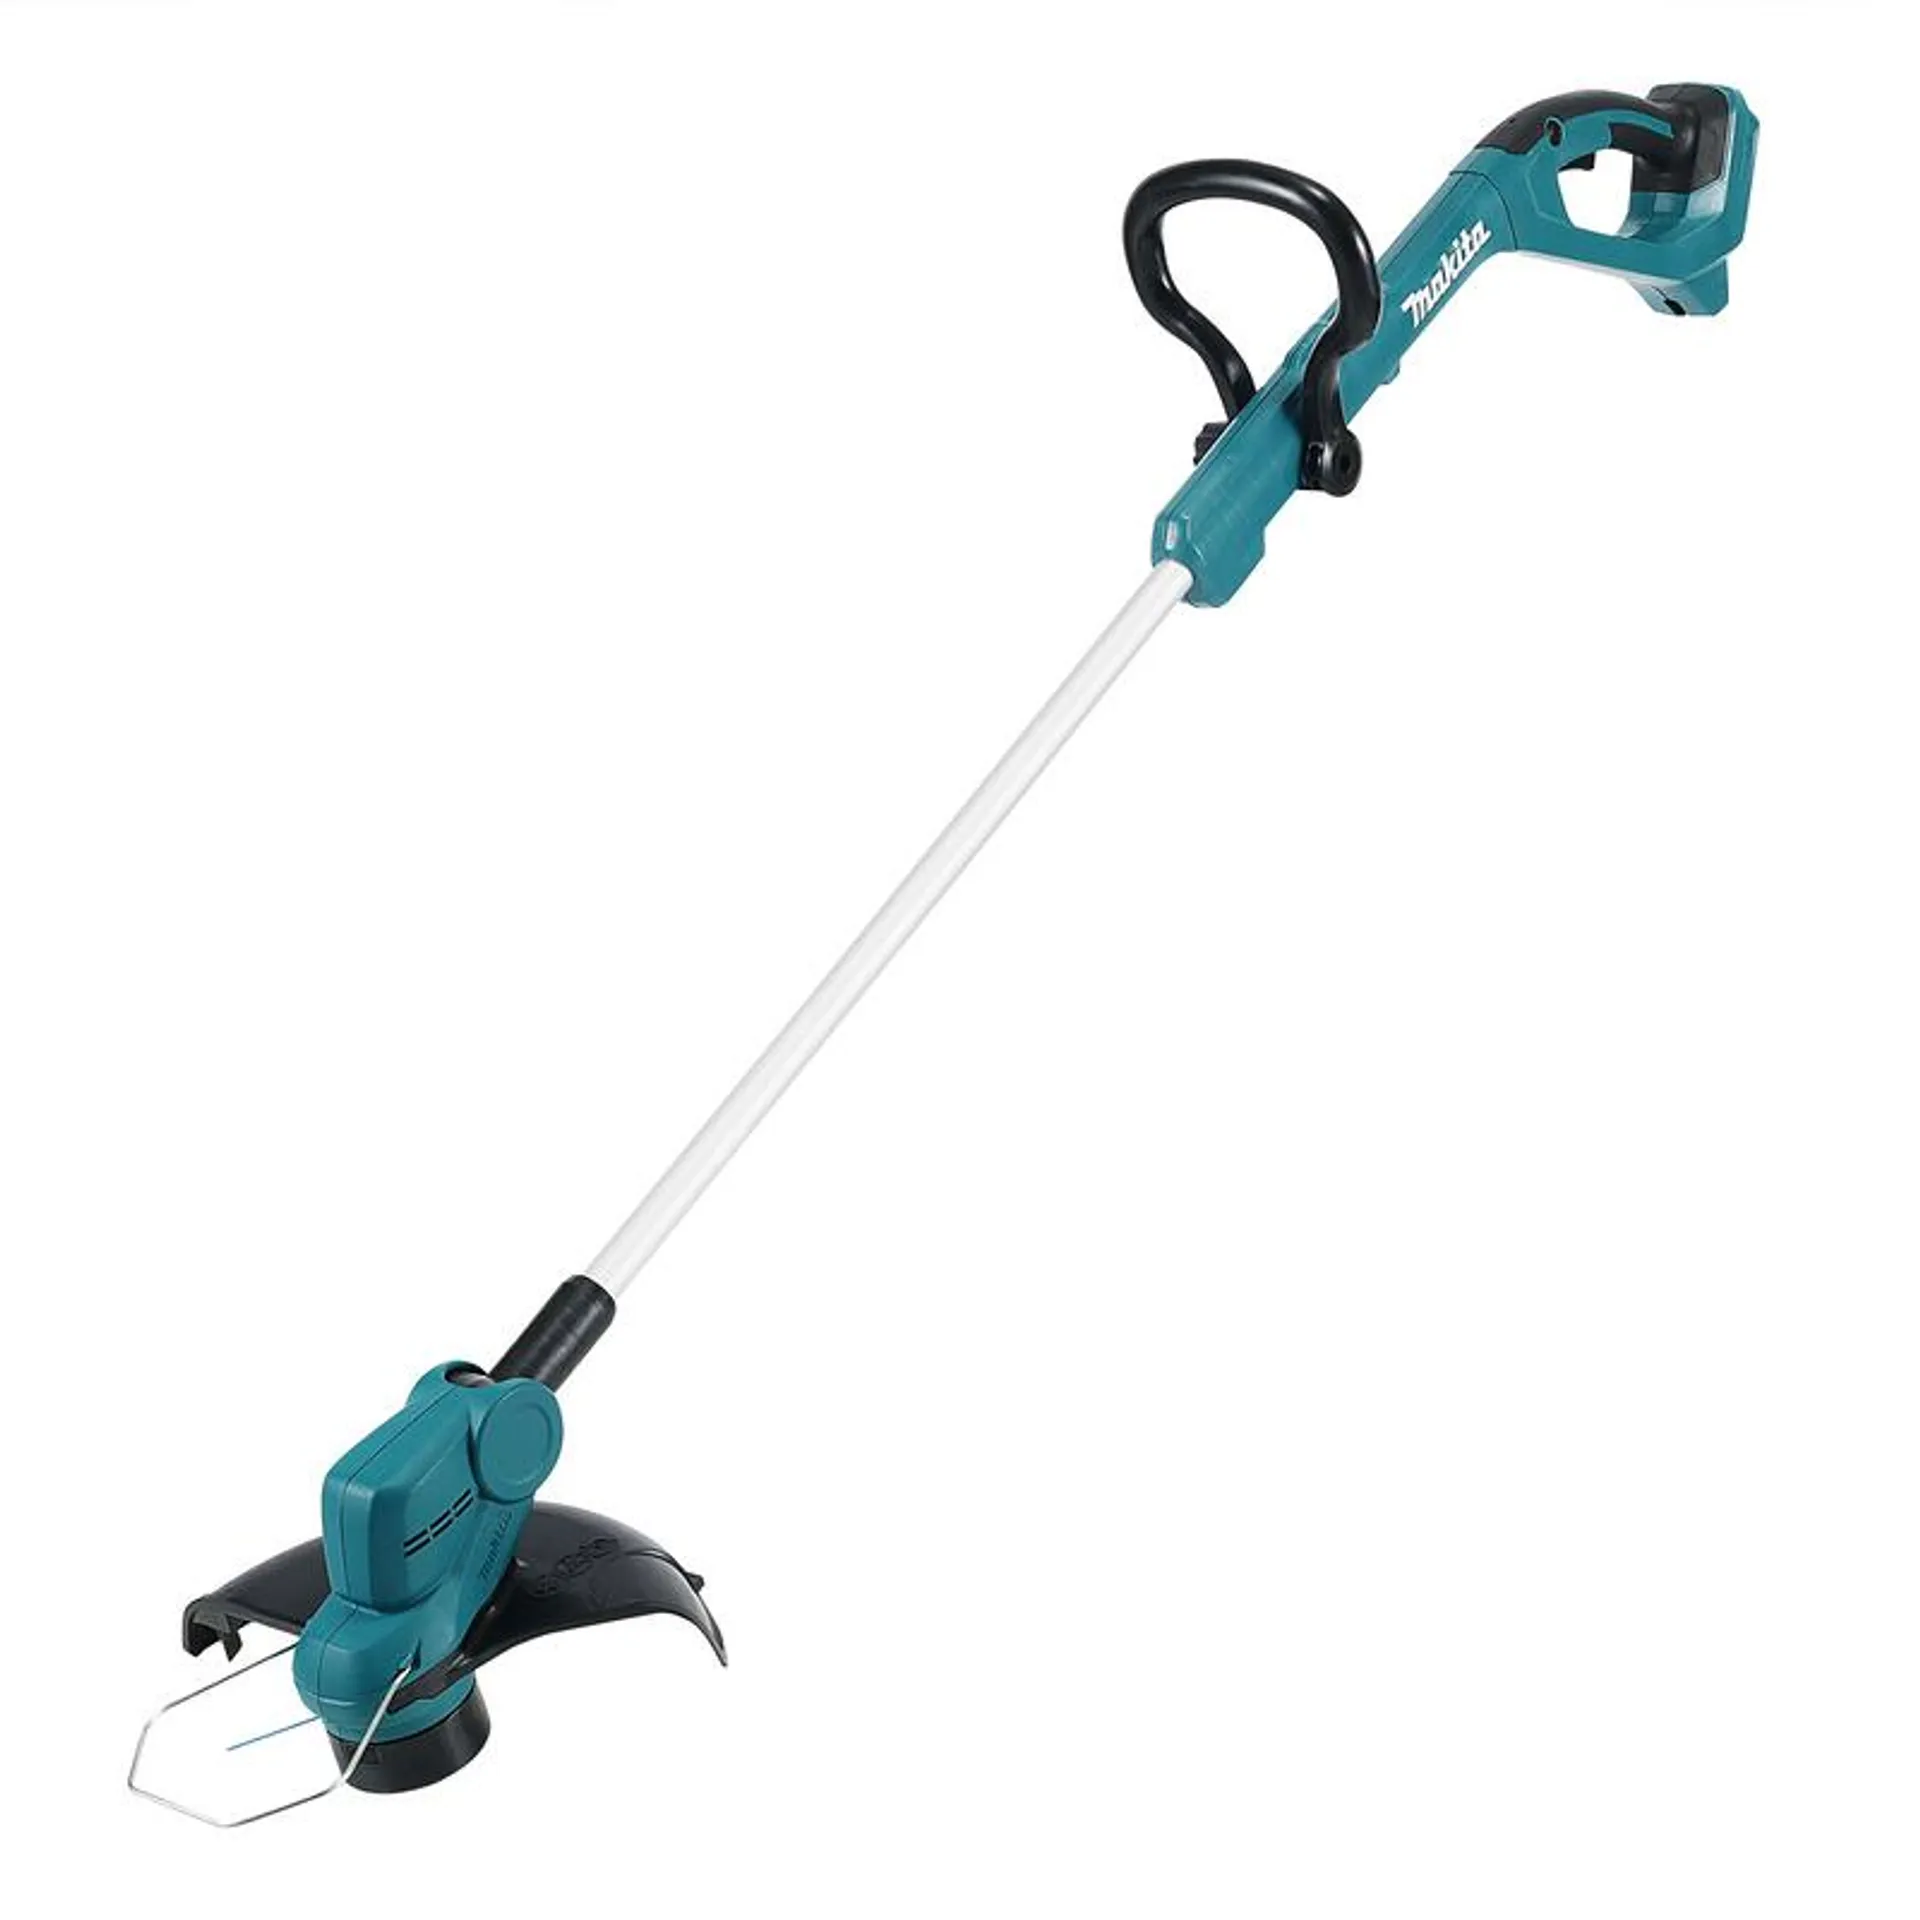 MAKITA 18V LINE TRIMMER 10 1/4IN. WITH BL1